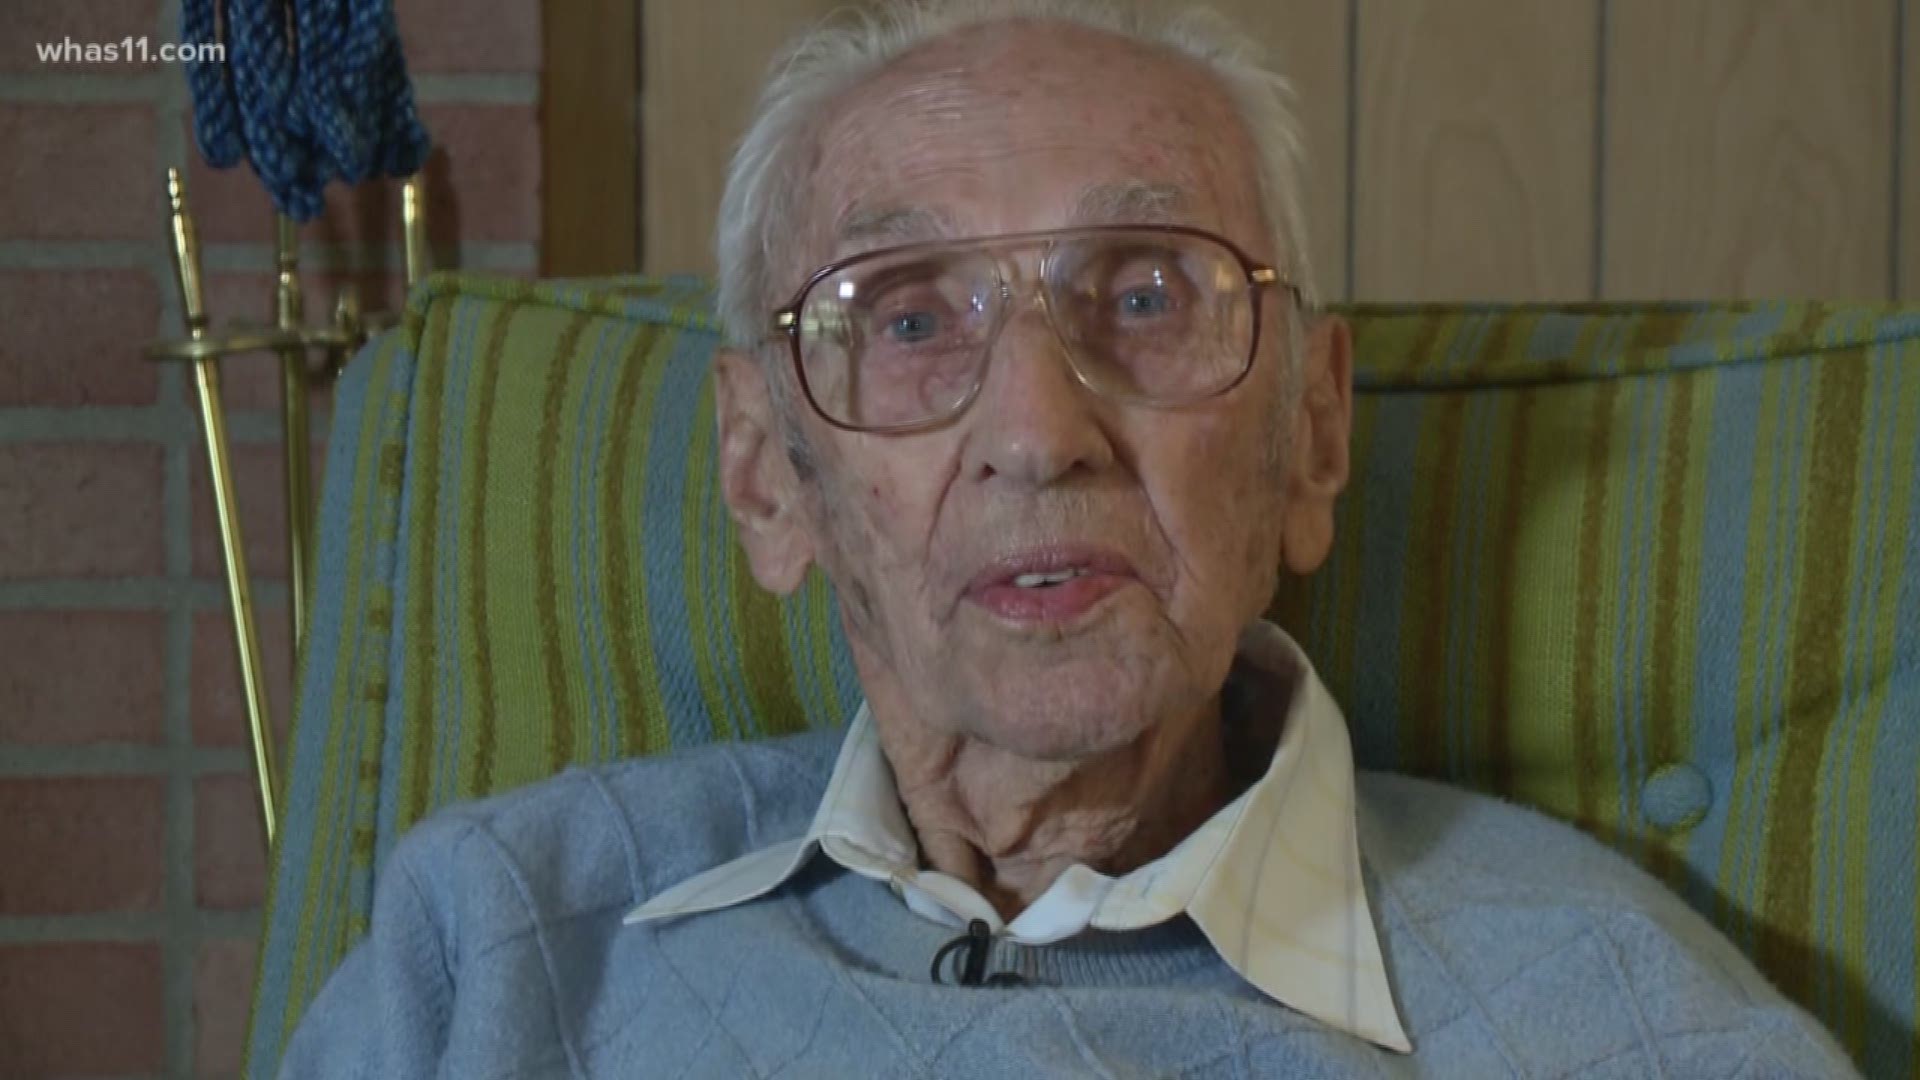 As we celebrate veterans all weekend, tonight the spotlight is on 100 year old Ernie Micka.